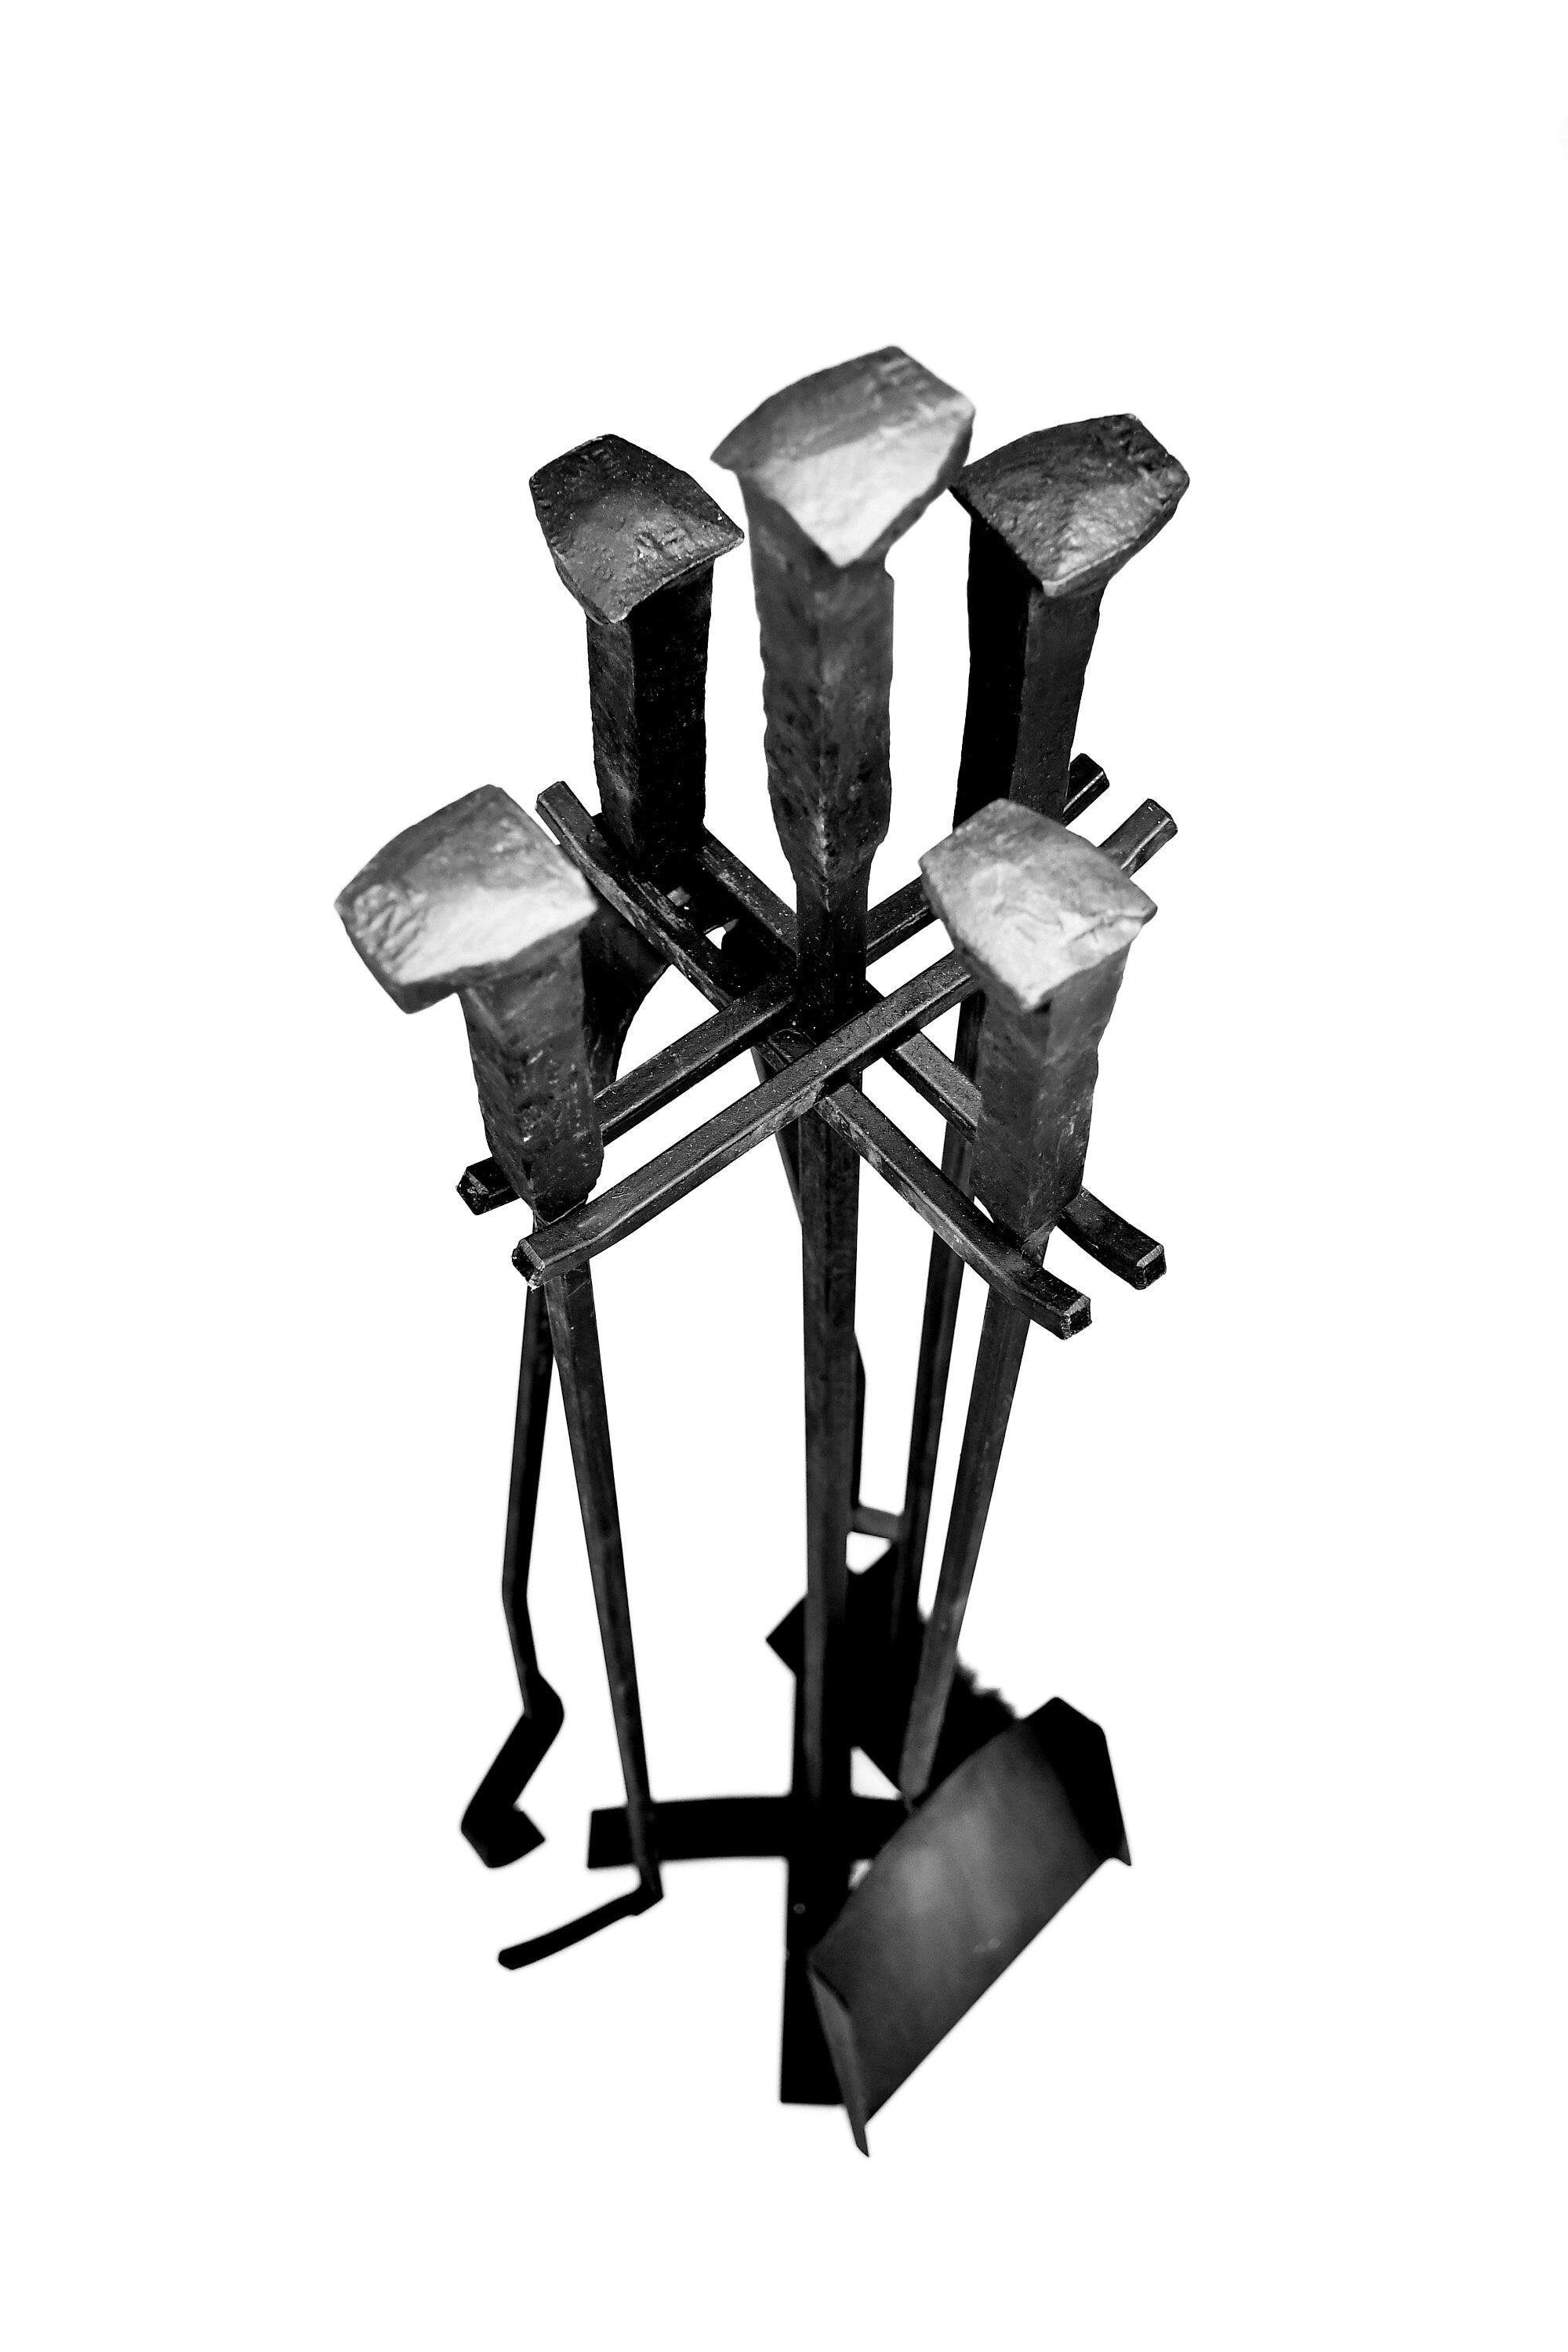 Gaucholife Grill Fireplace Pit Tools Set Fire Poker Tongs Brush Shovel And Stand | Blacksmith Made